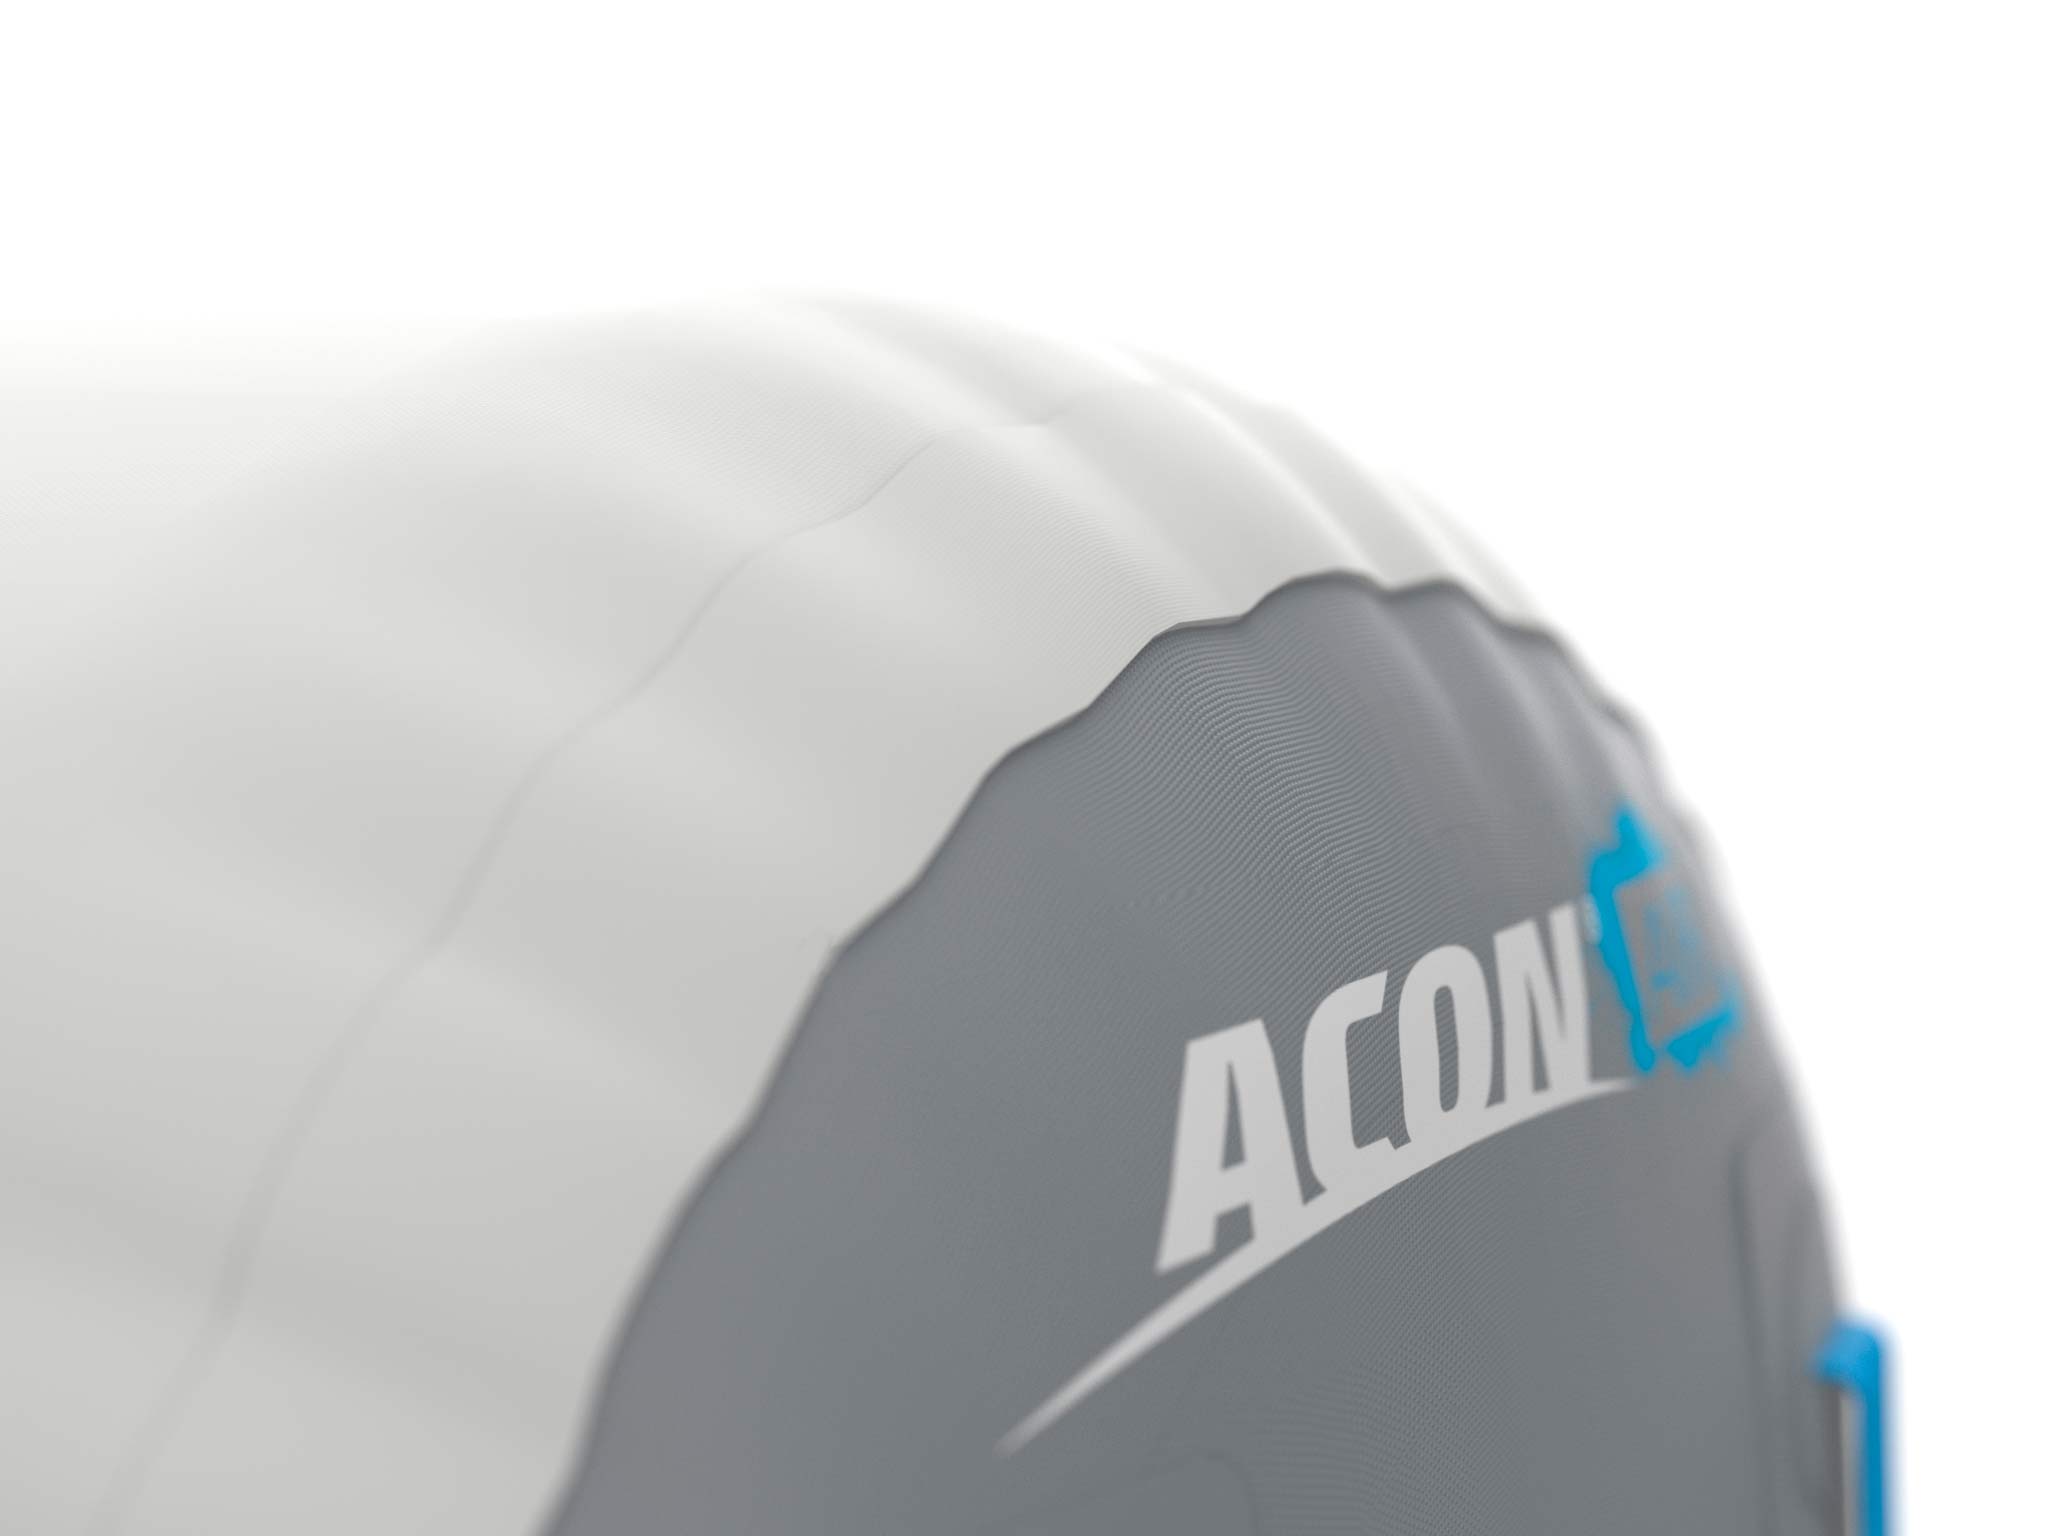 ACON AirRoll for Tricking and Gymnastics 0,6 x 1,2m - Details ACON logo